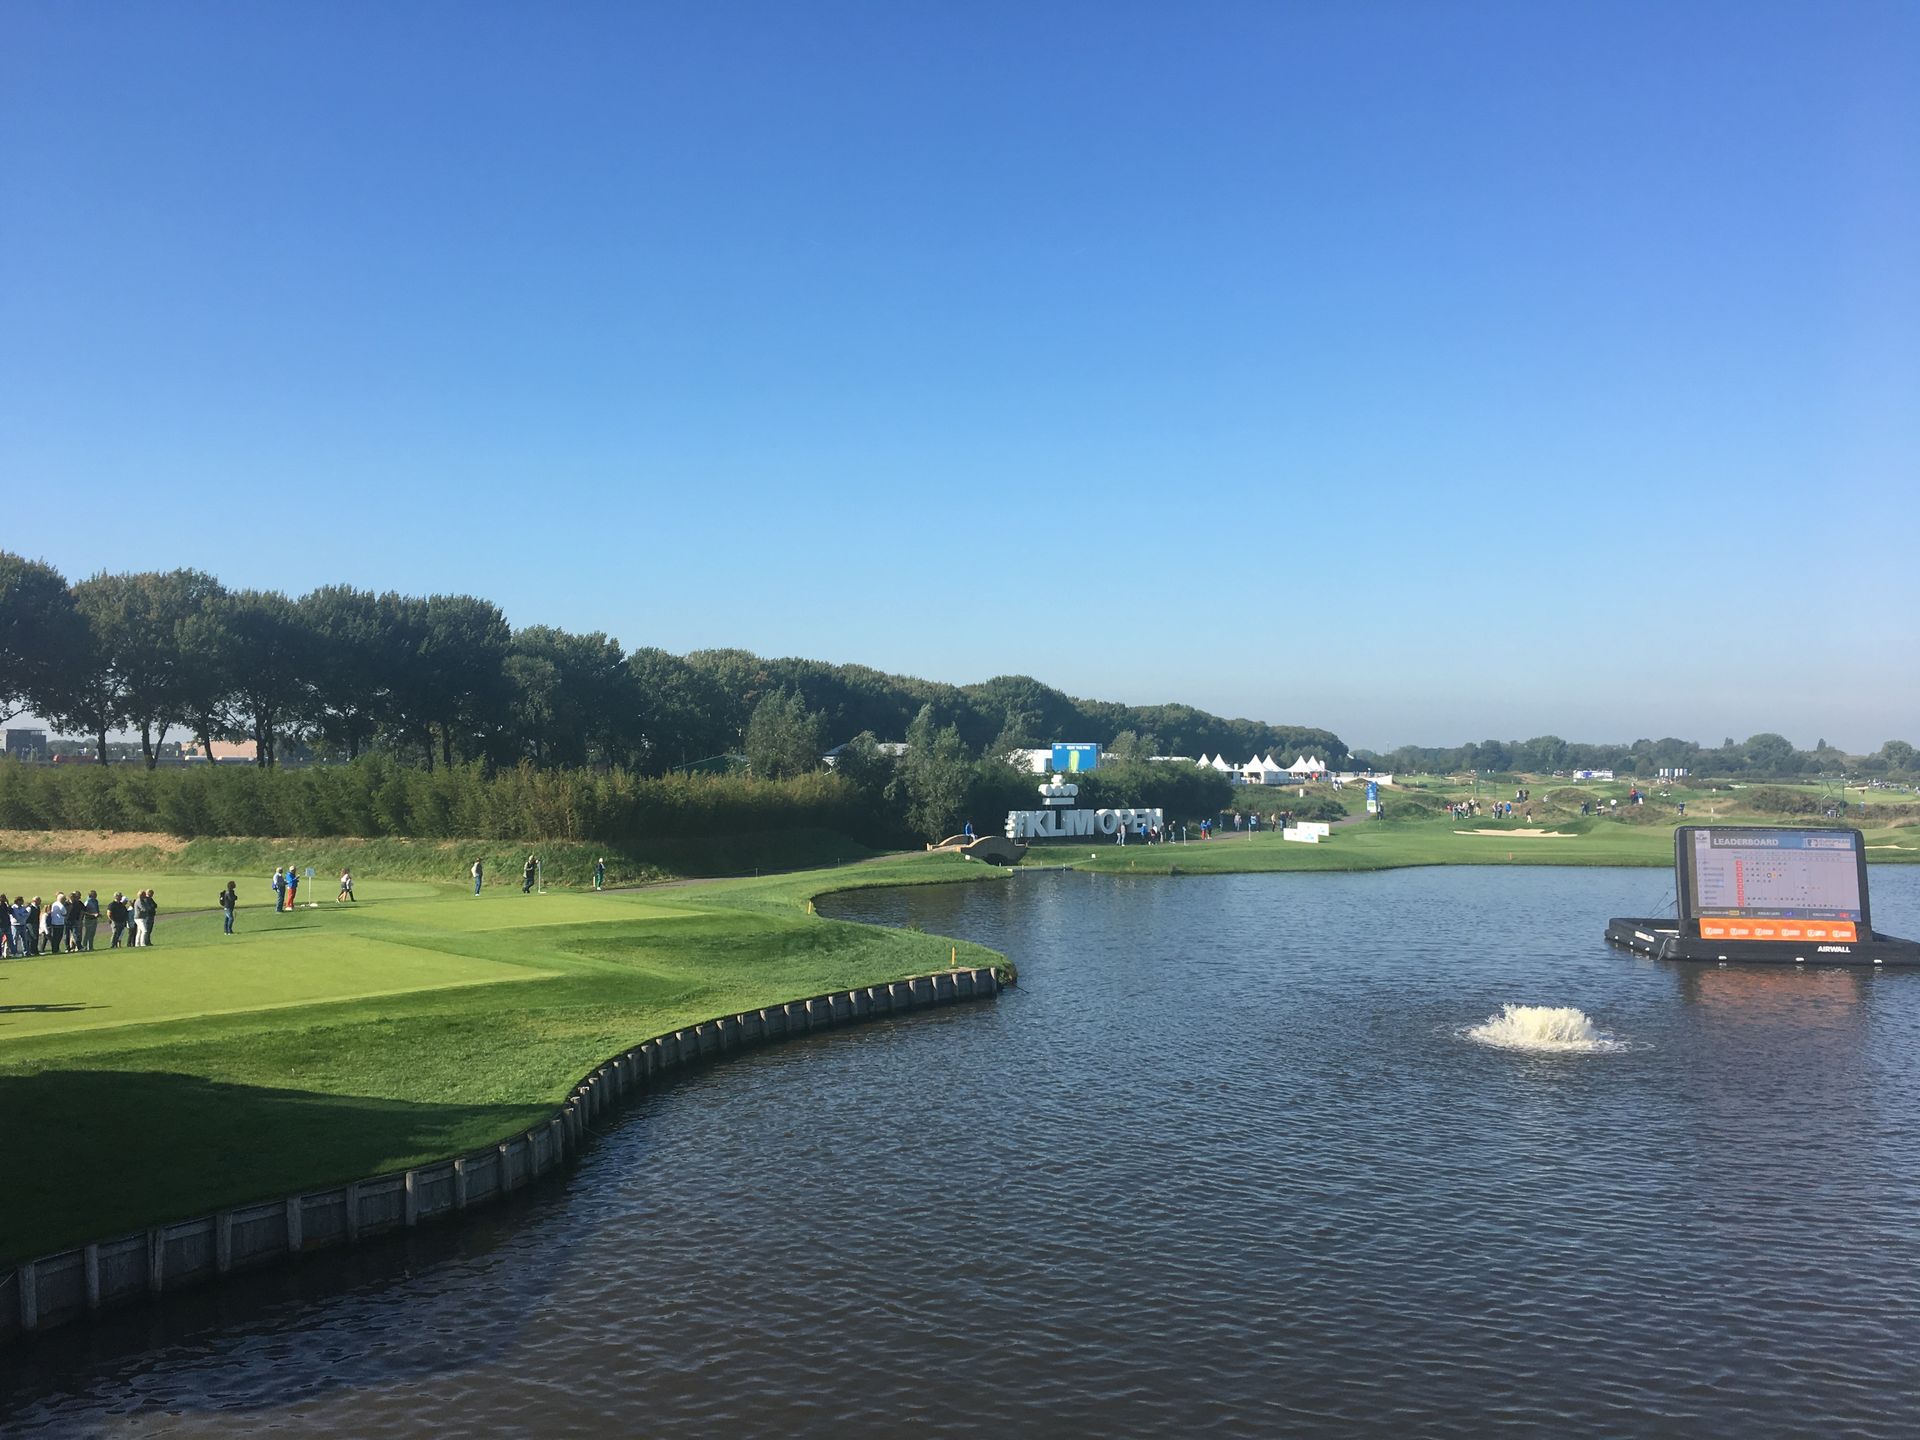 KLM Open at The Dutch (photo credits, member Jeroen)